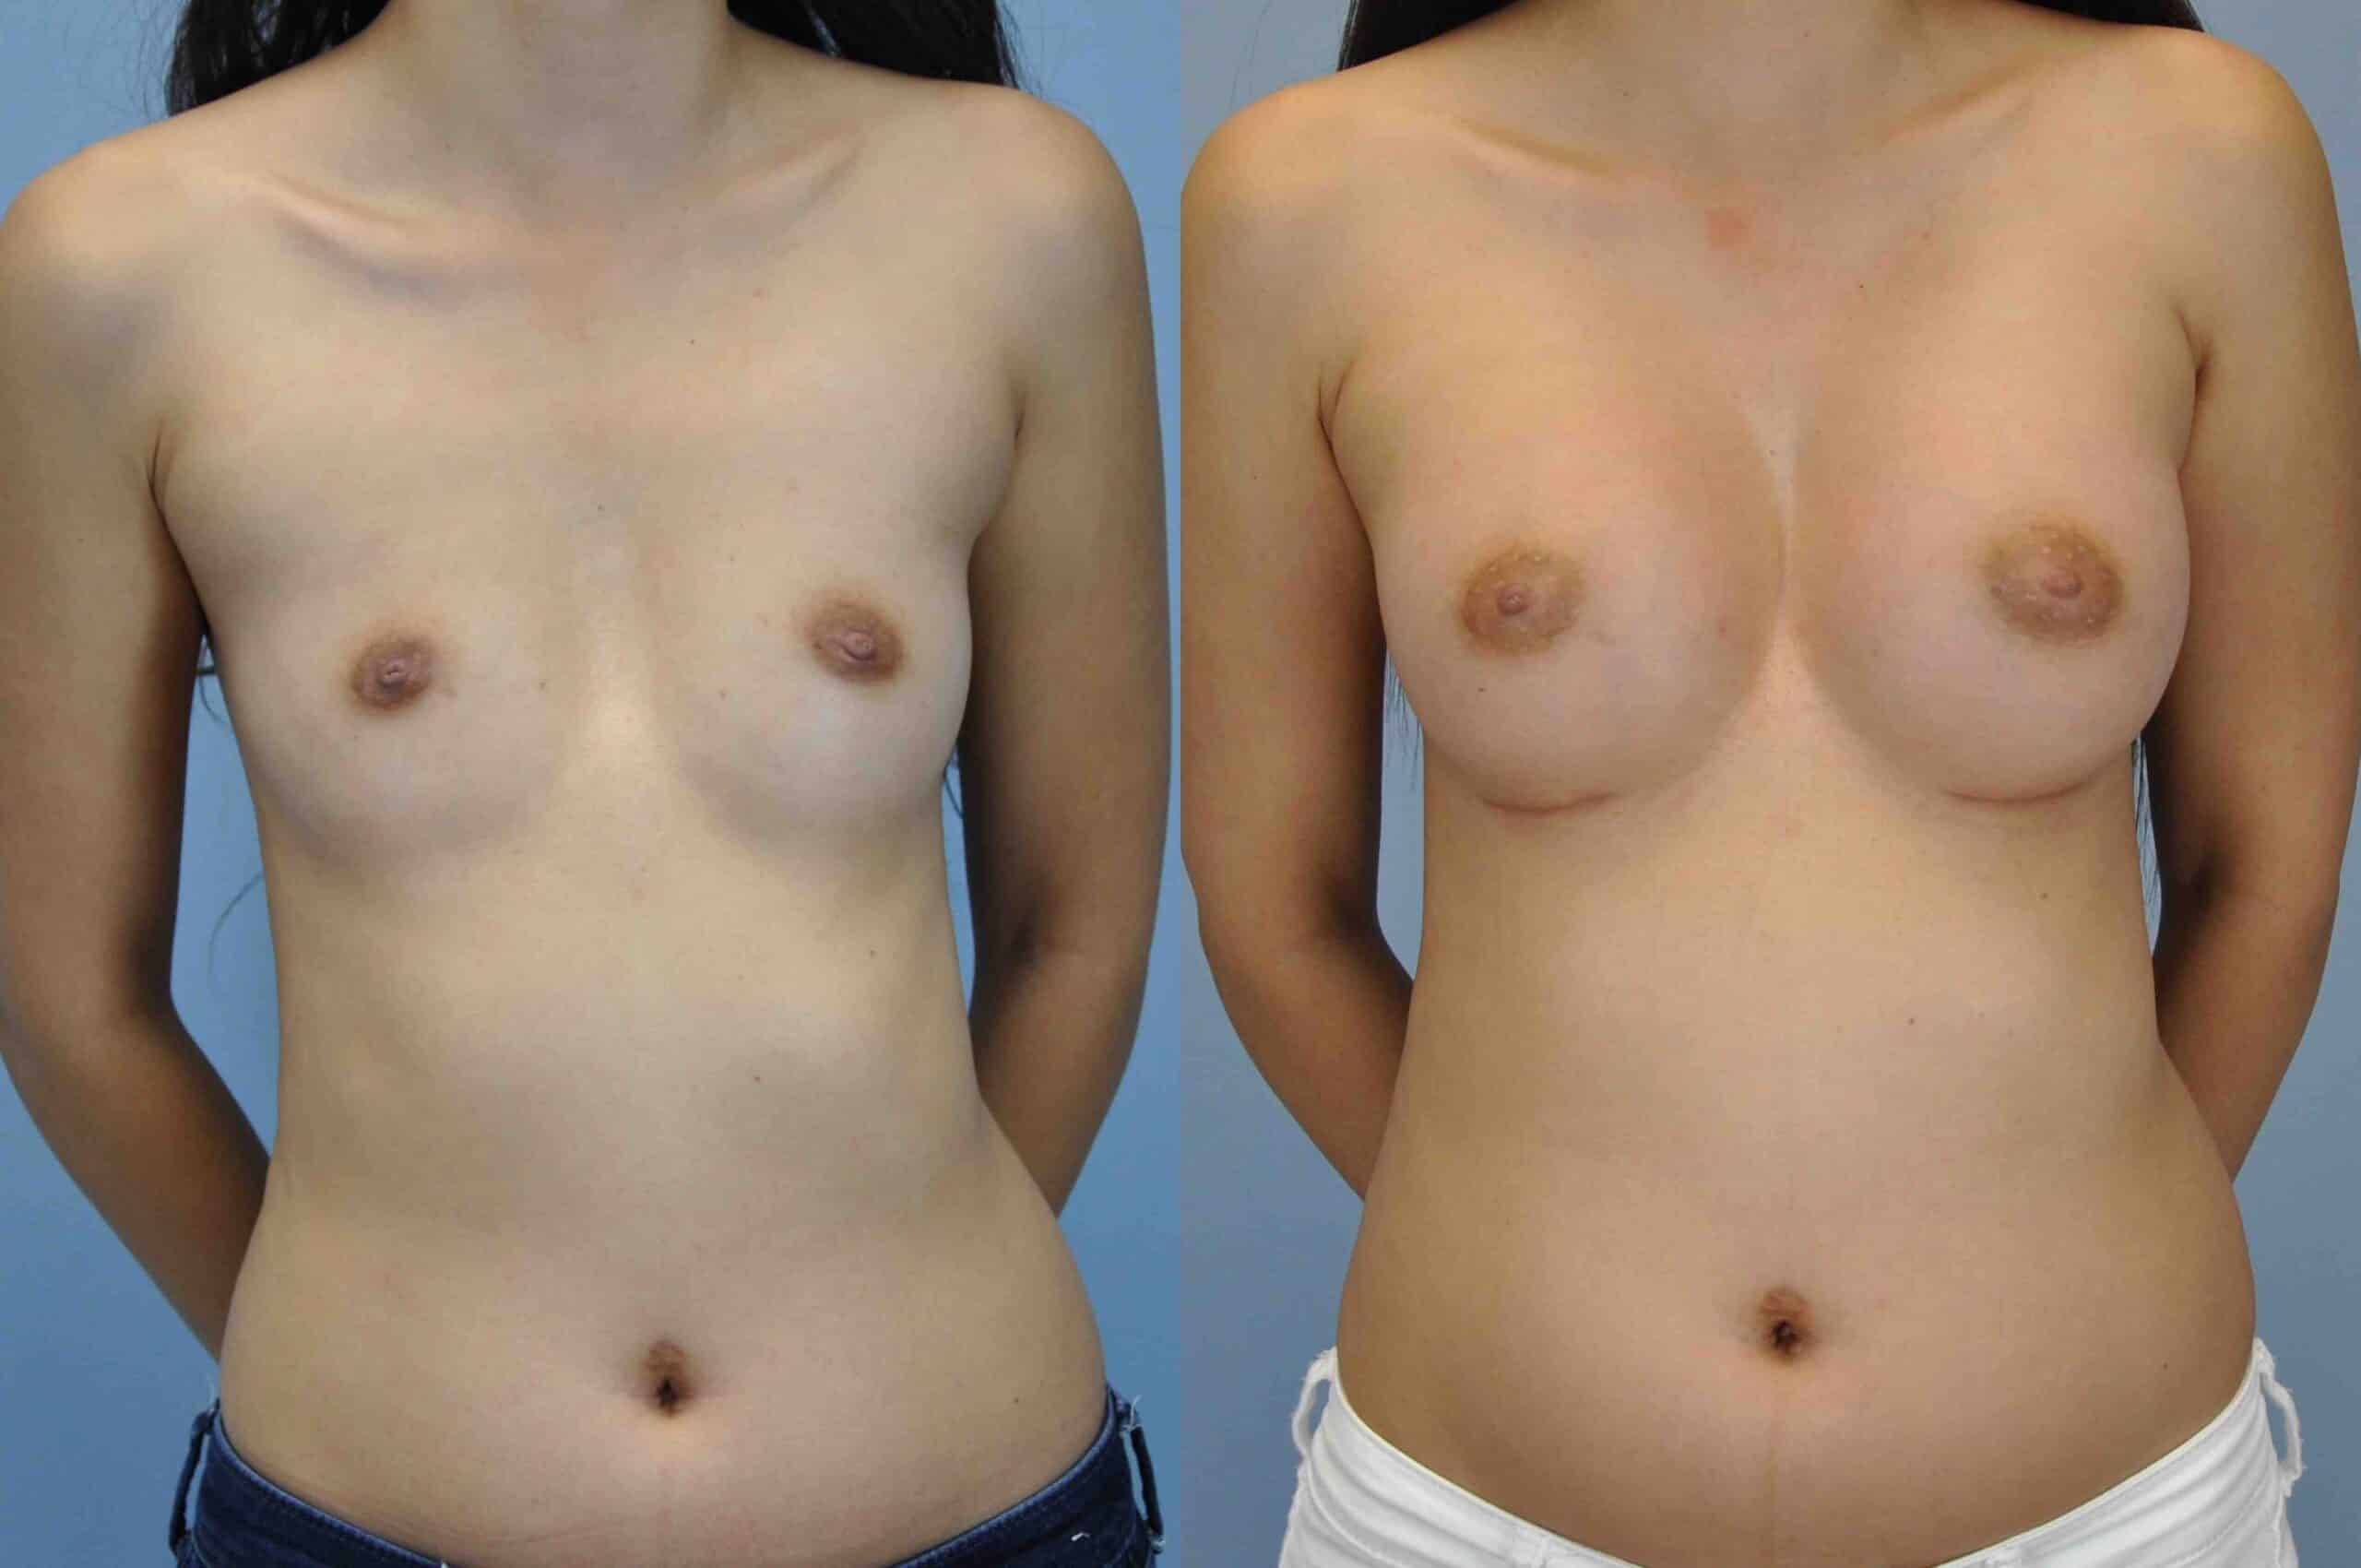 Before and after, patient 3 mo post op from Breast Augmentation and Level III Muscle Release procedures performed by Dr. Paul Vanek